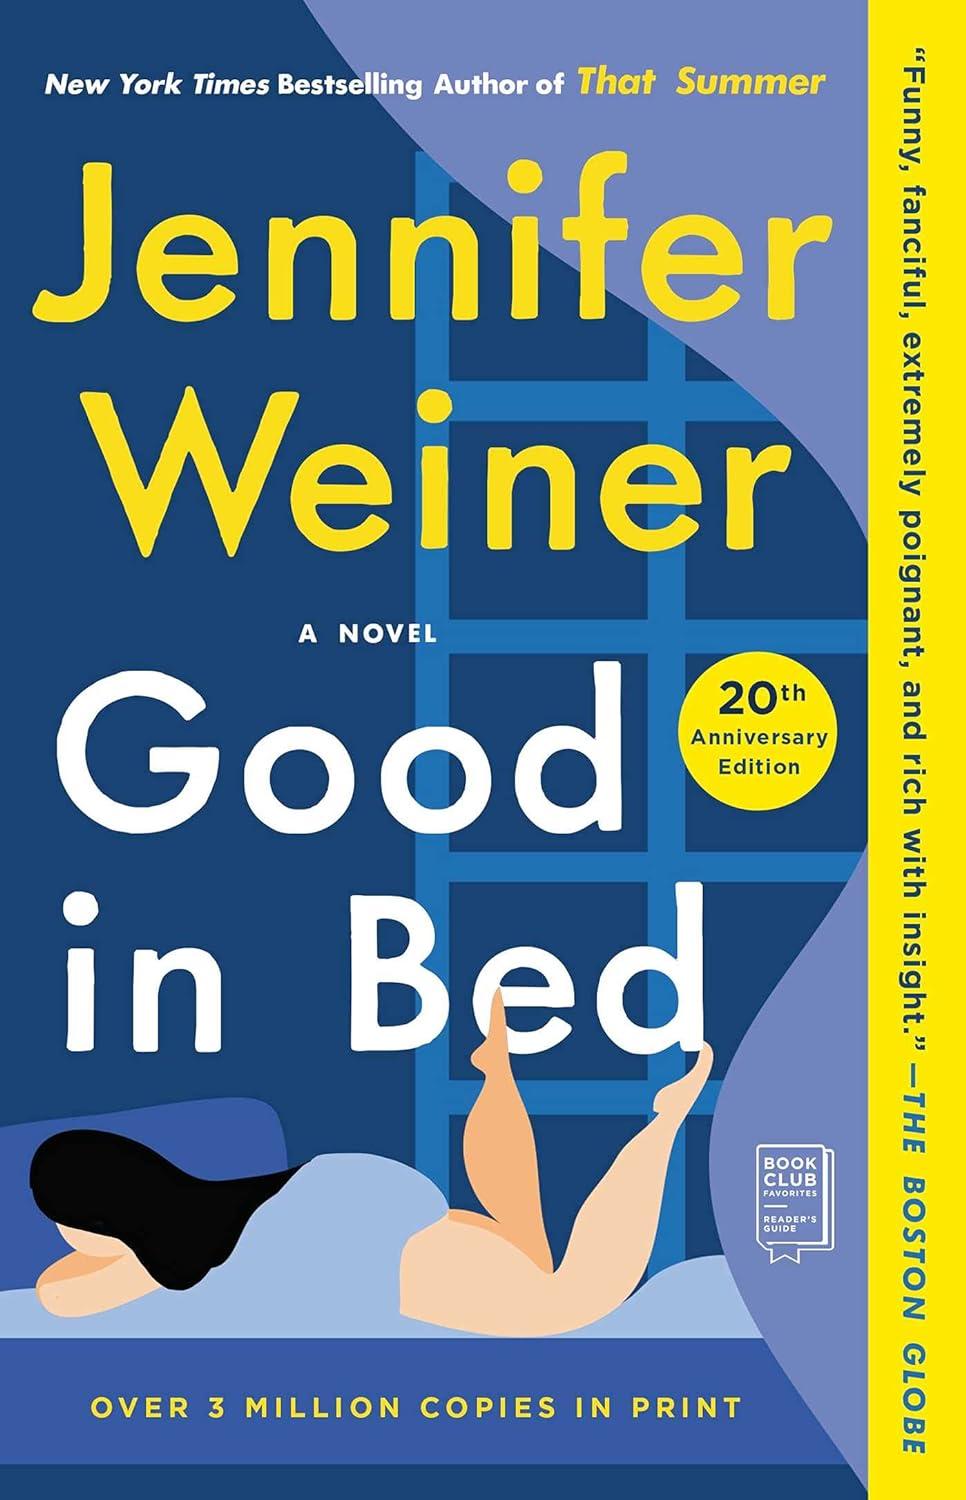 Good in Bed by Jennifer Weiner: Study Guide & Literary Devices